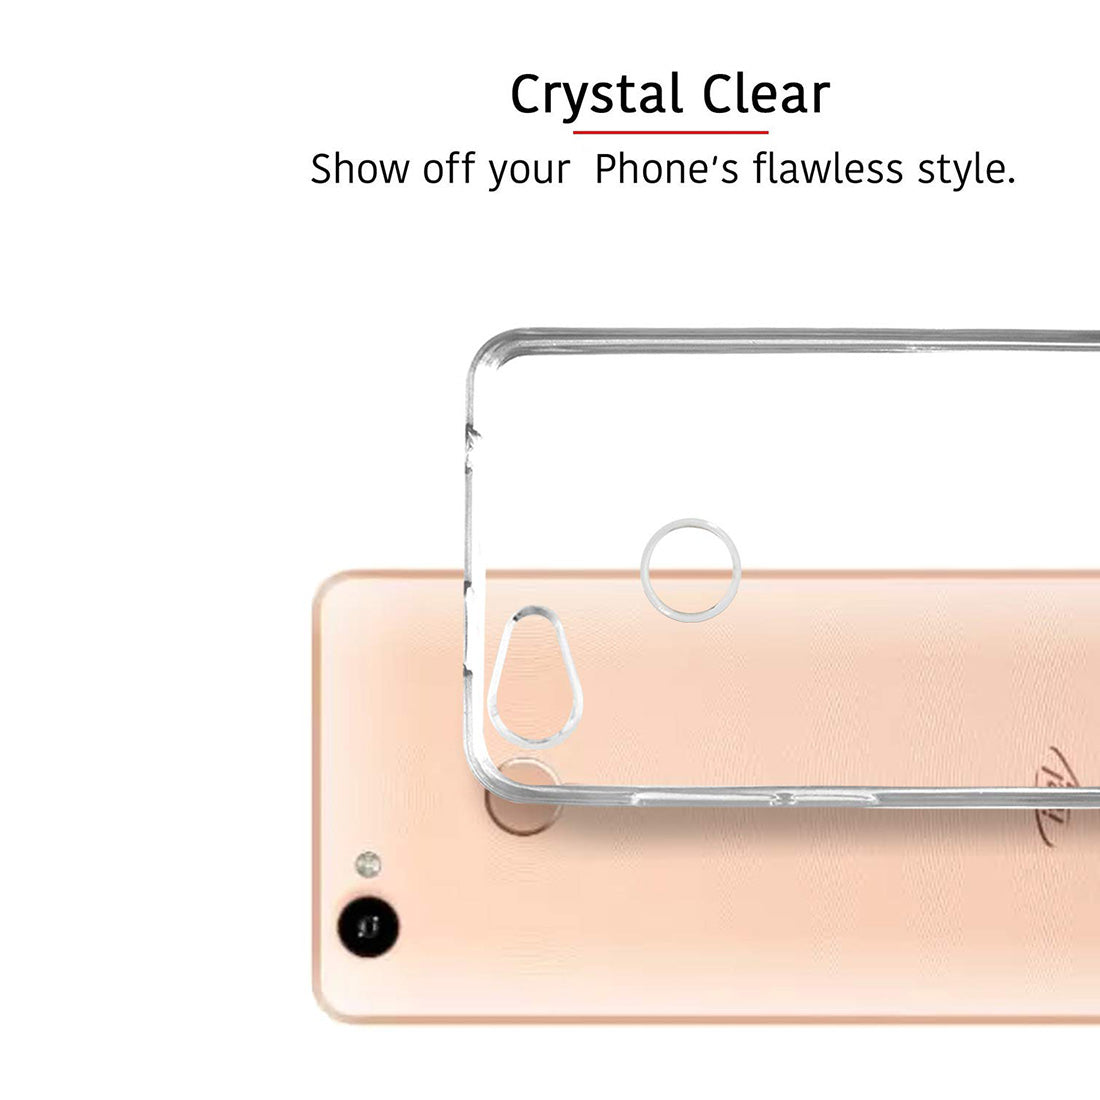 Clear Case for Itel A41 / A41 Plus